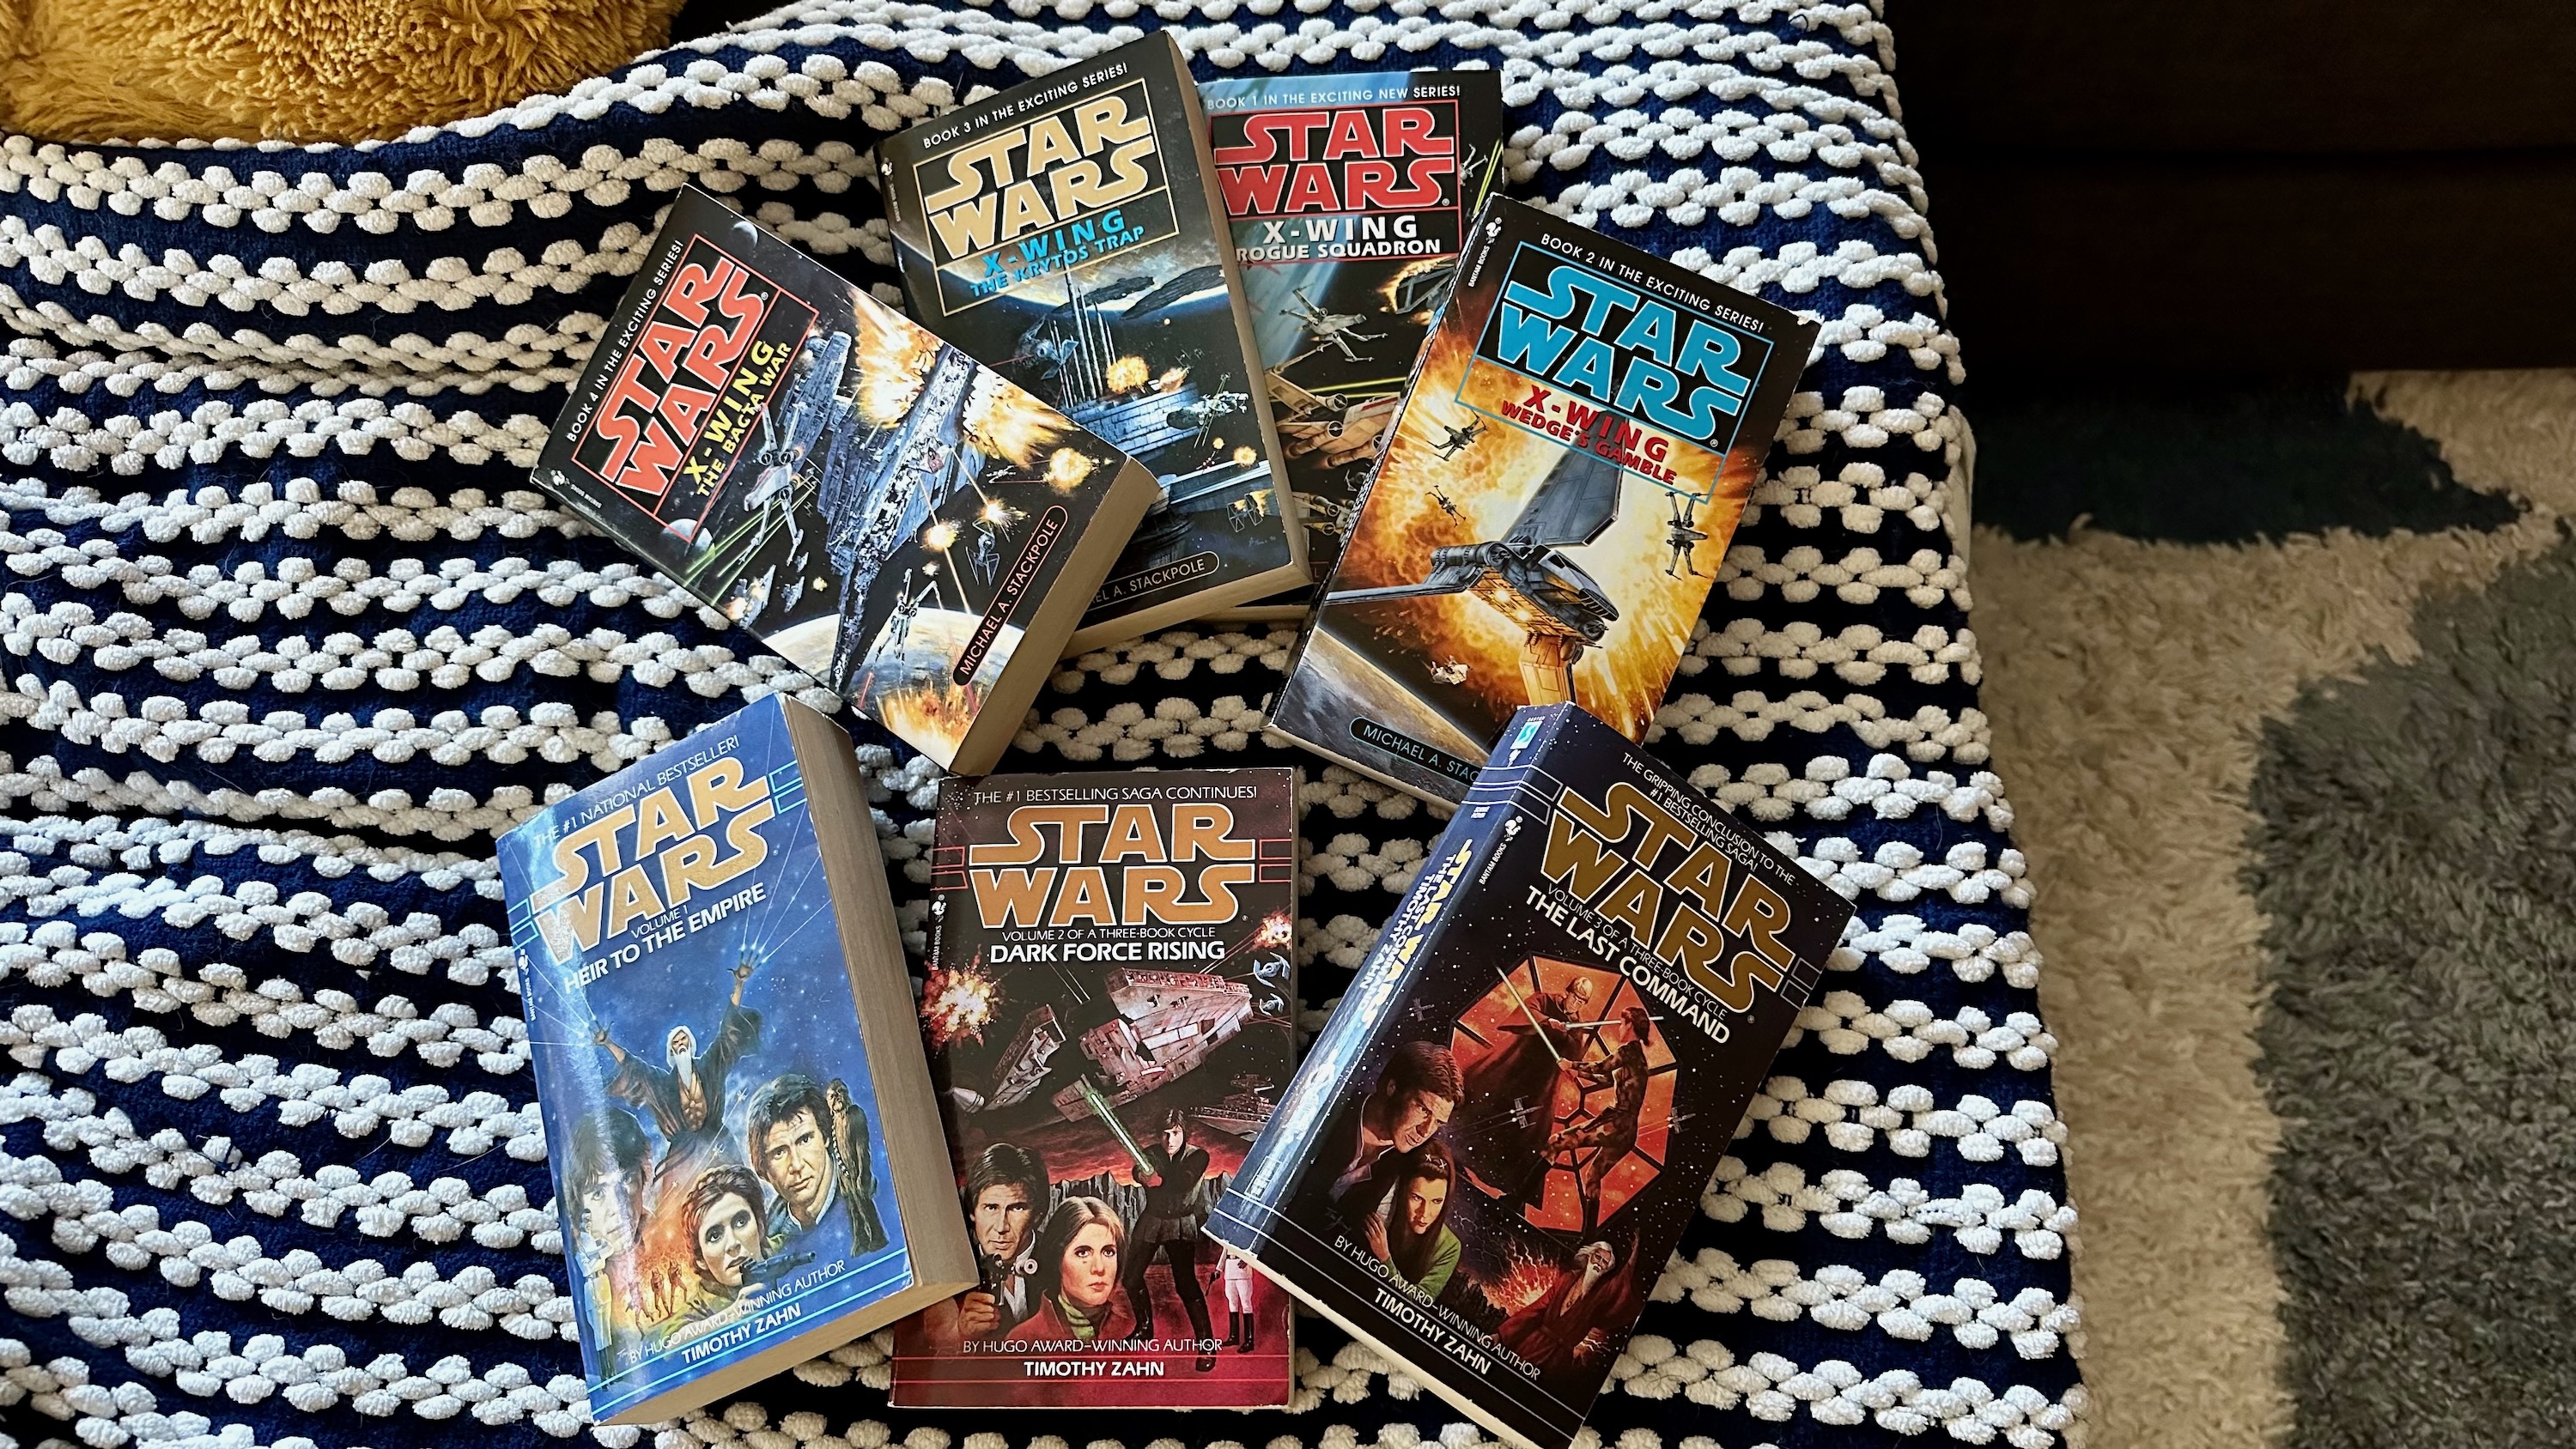 A bunch of Star Wars Legends canon books piled on one another